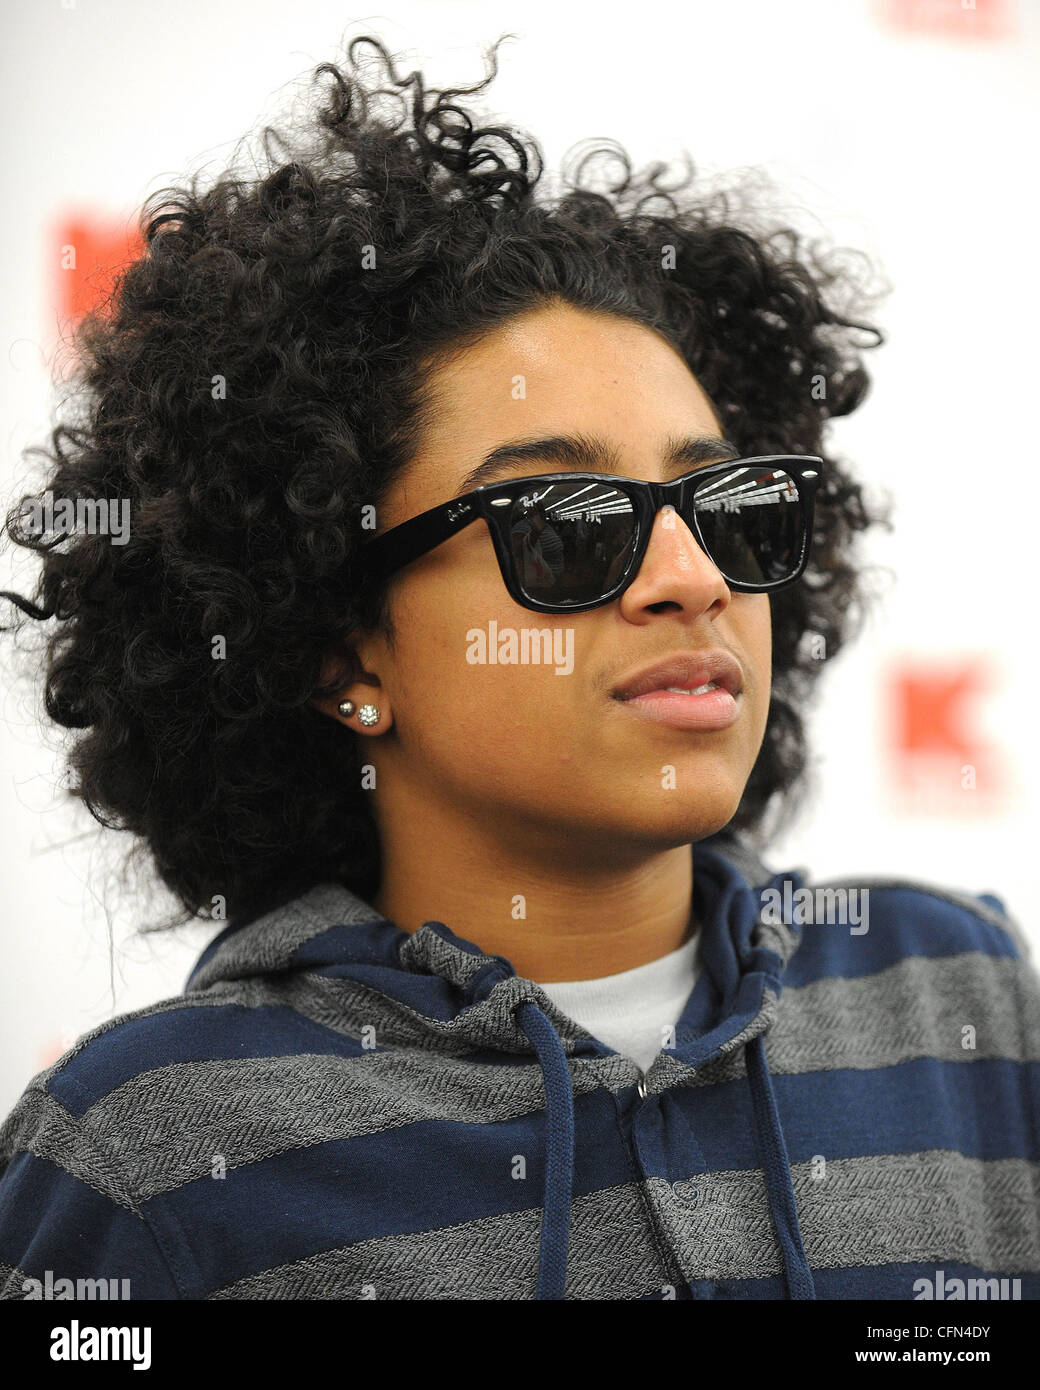 Princeton of Mindless Behavior signs autographs for fans during a meet and greet event held at a Kmart store in Miami Miami, Florida - 08.02.12 Stock Photo